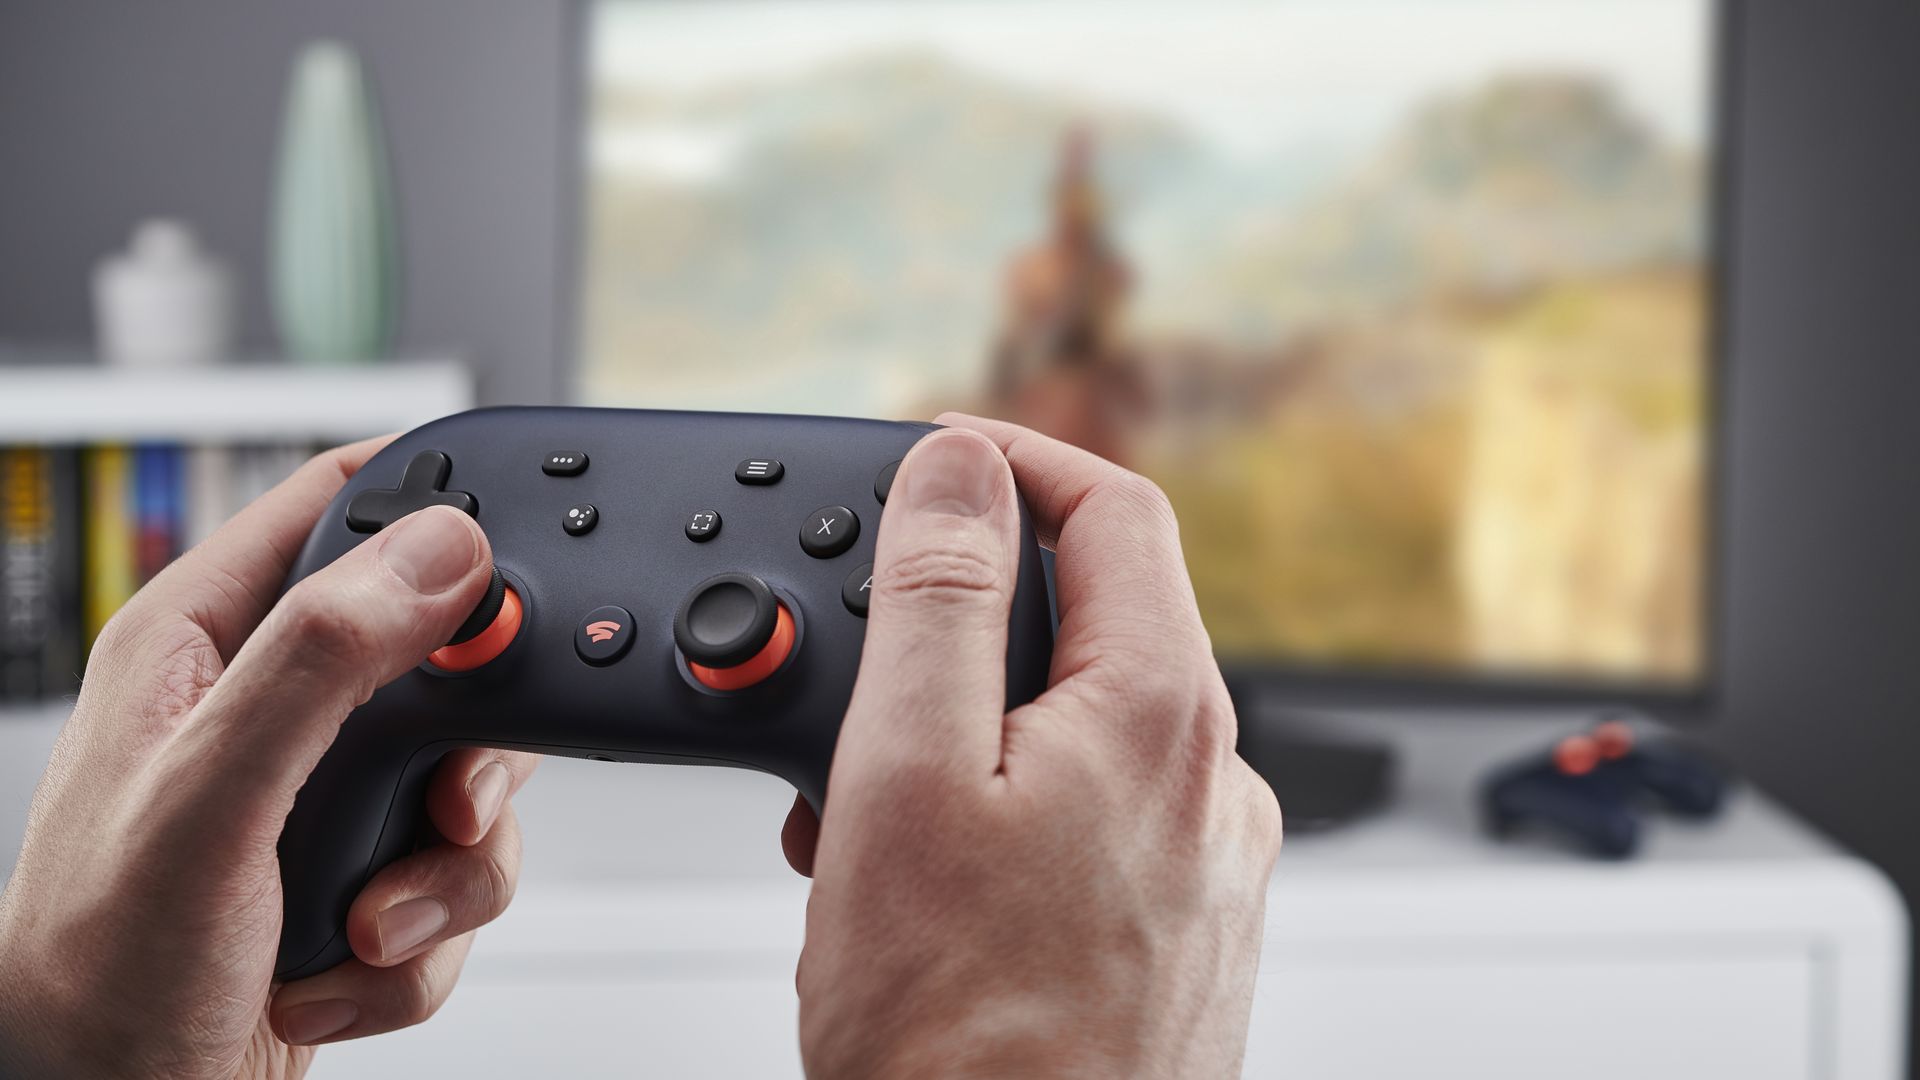 Photo of  a person's hands as they are holding a black game controller. A blurred-out TV can be seen in the background